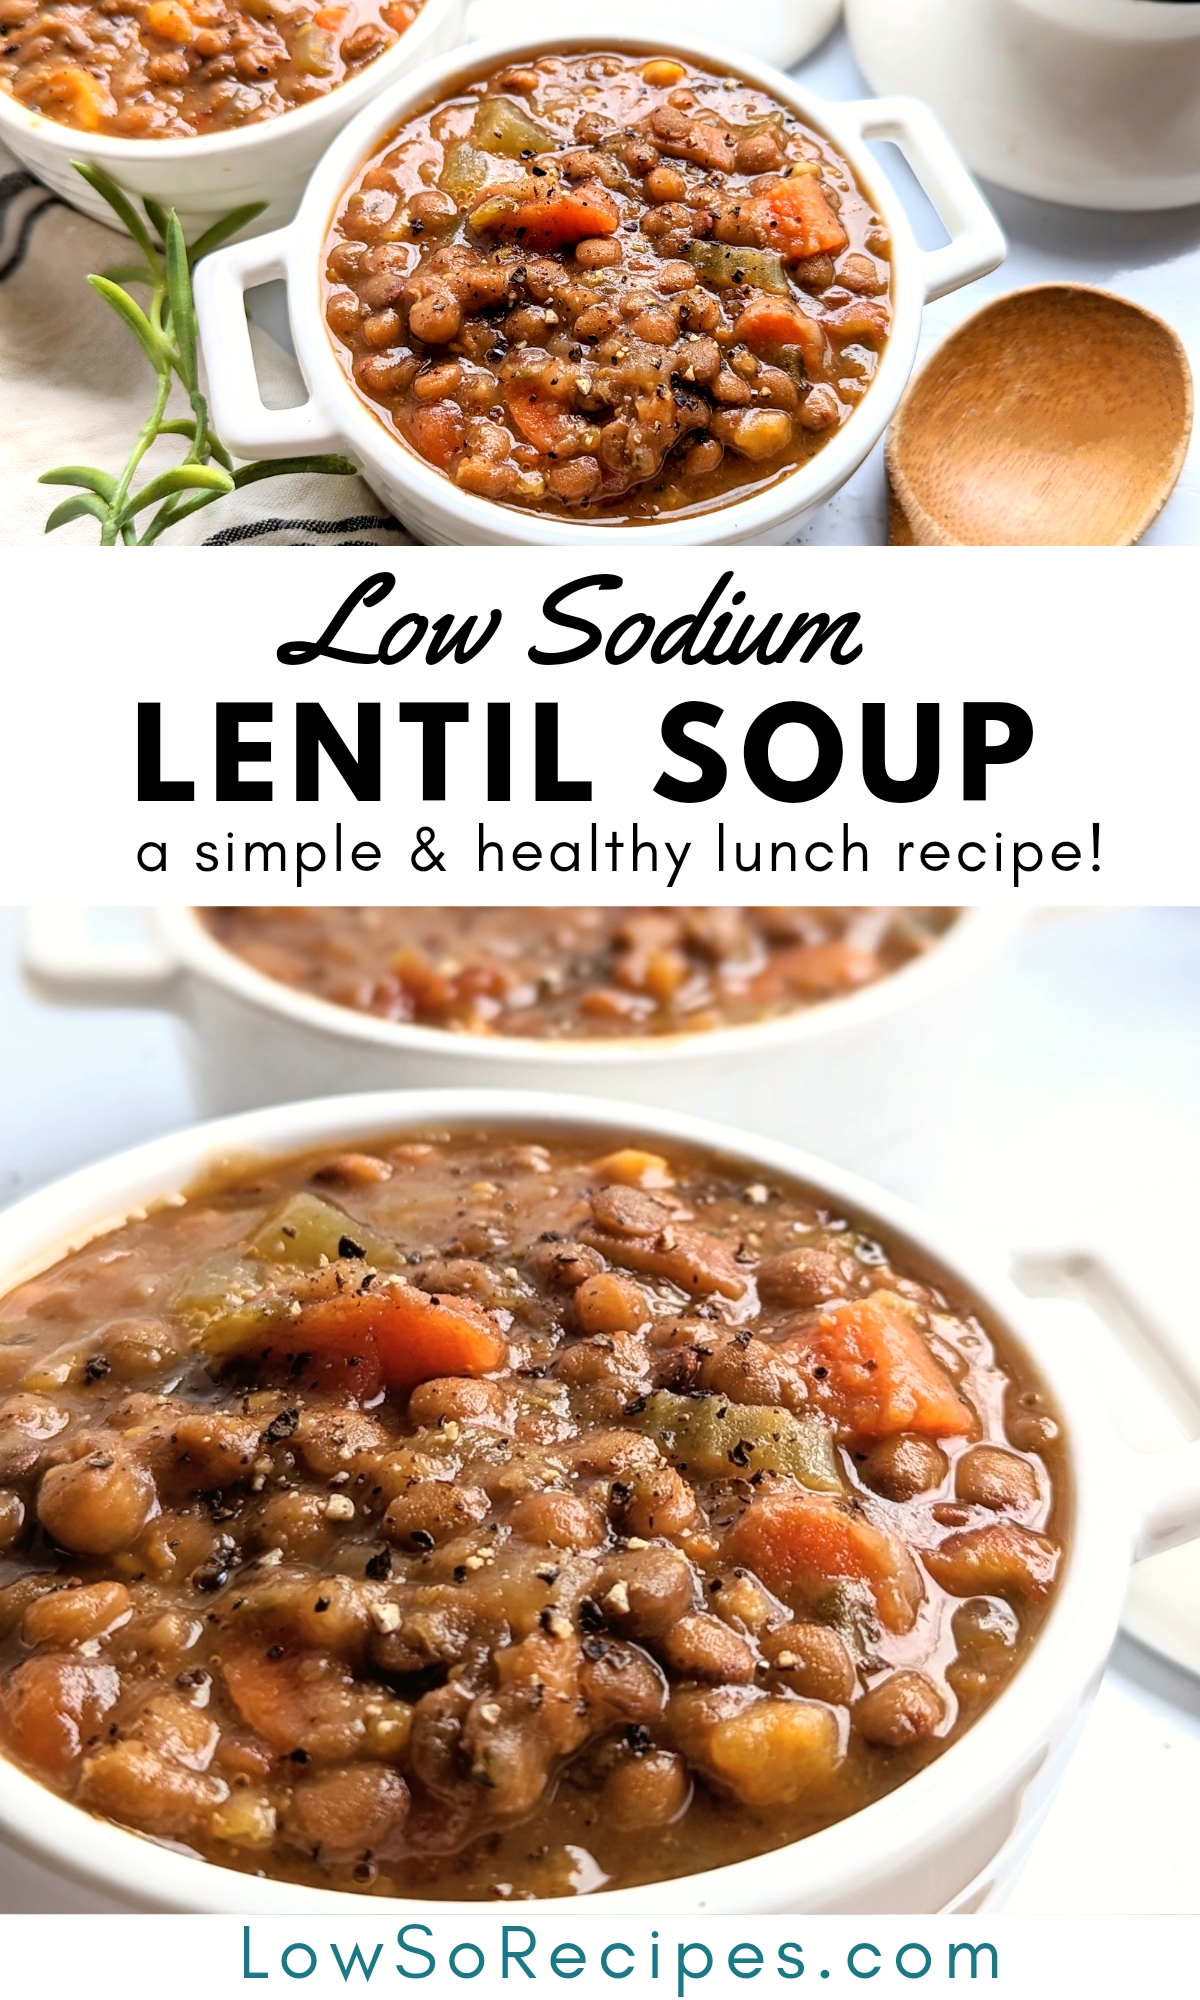 low sodium lentil soup recipe no salt added soups healthy vegetarian lunches with lentils low in salt